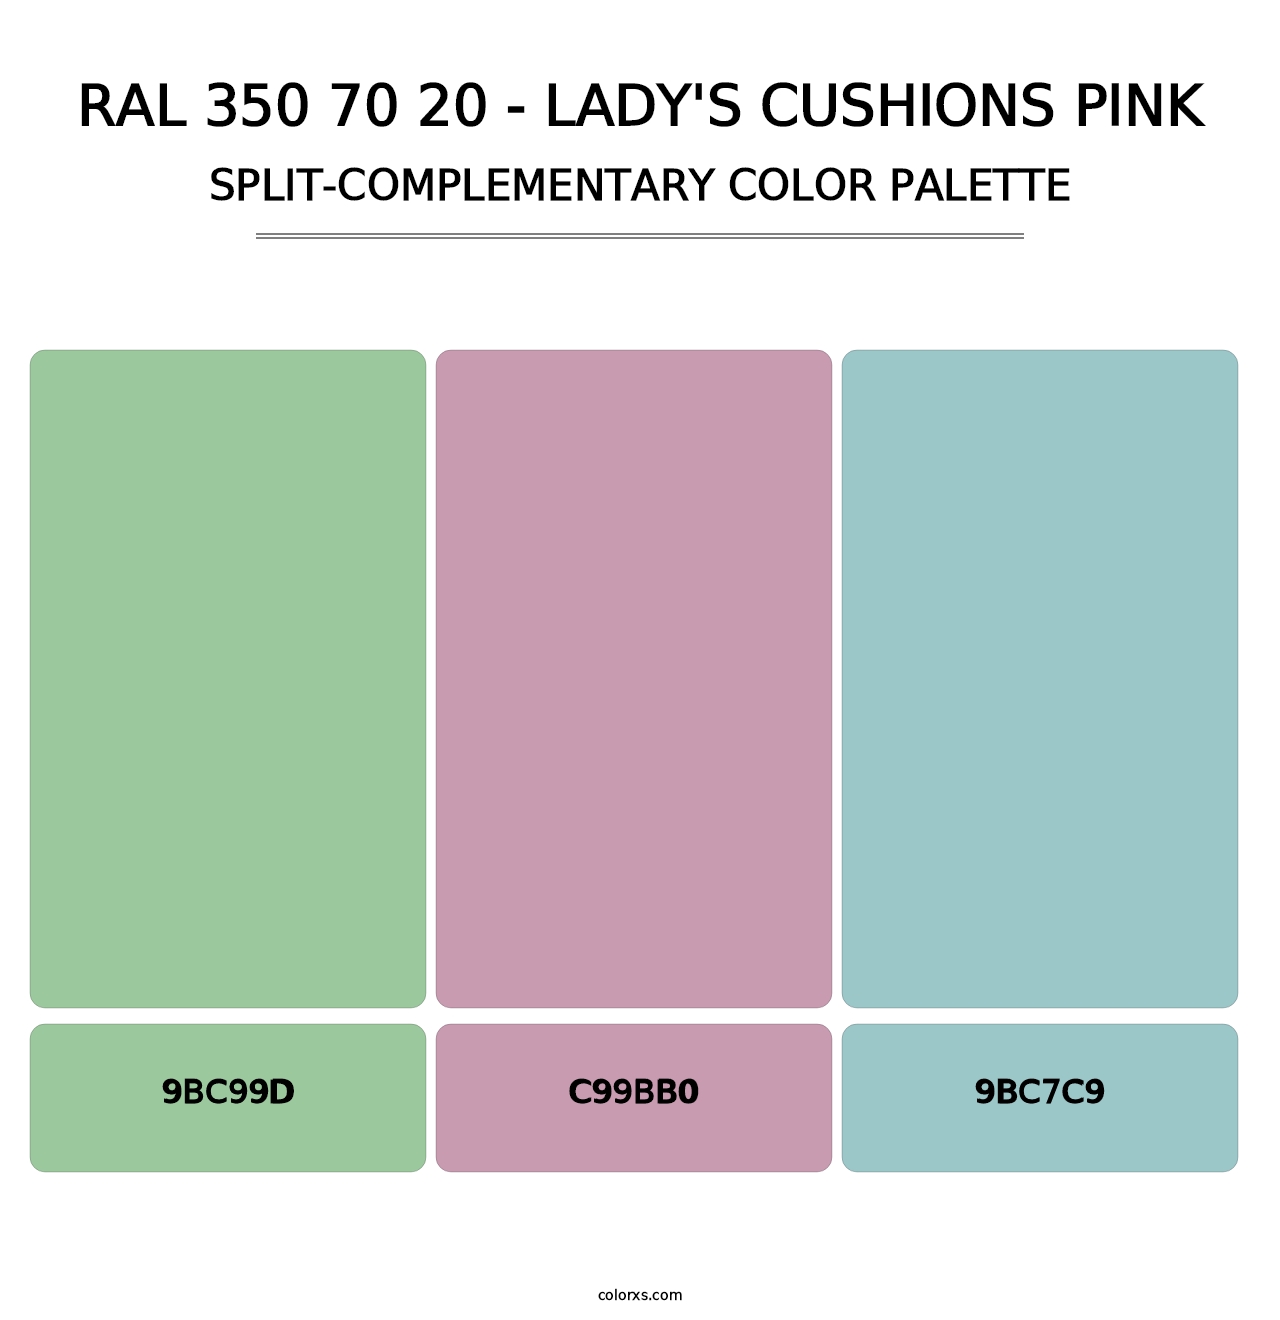 RAL 350 70 20 - Lady's Cushions Pink - Split-Complementary Color Palette